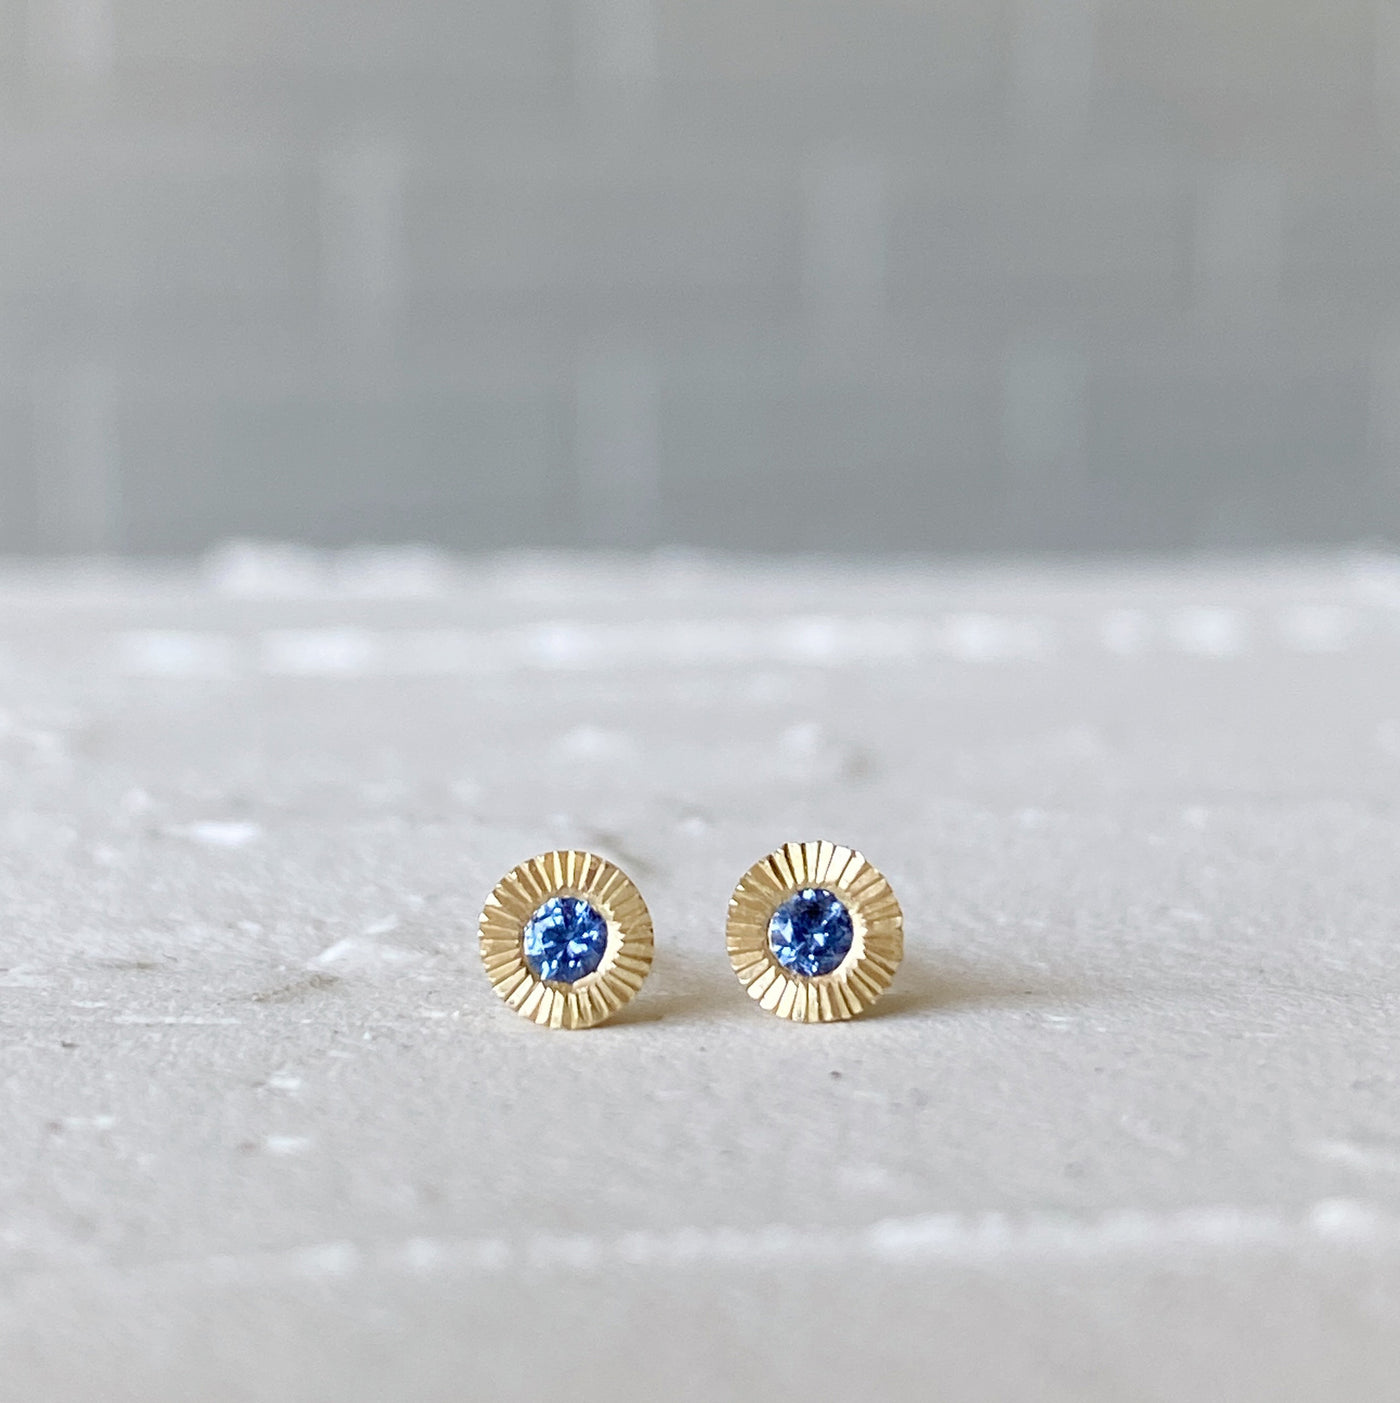 14k yellow gold small engraved Aurora stud earrings with blue Yogo Montana Sapphires in natural light